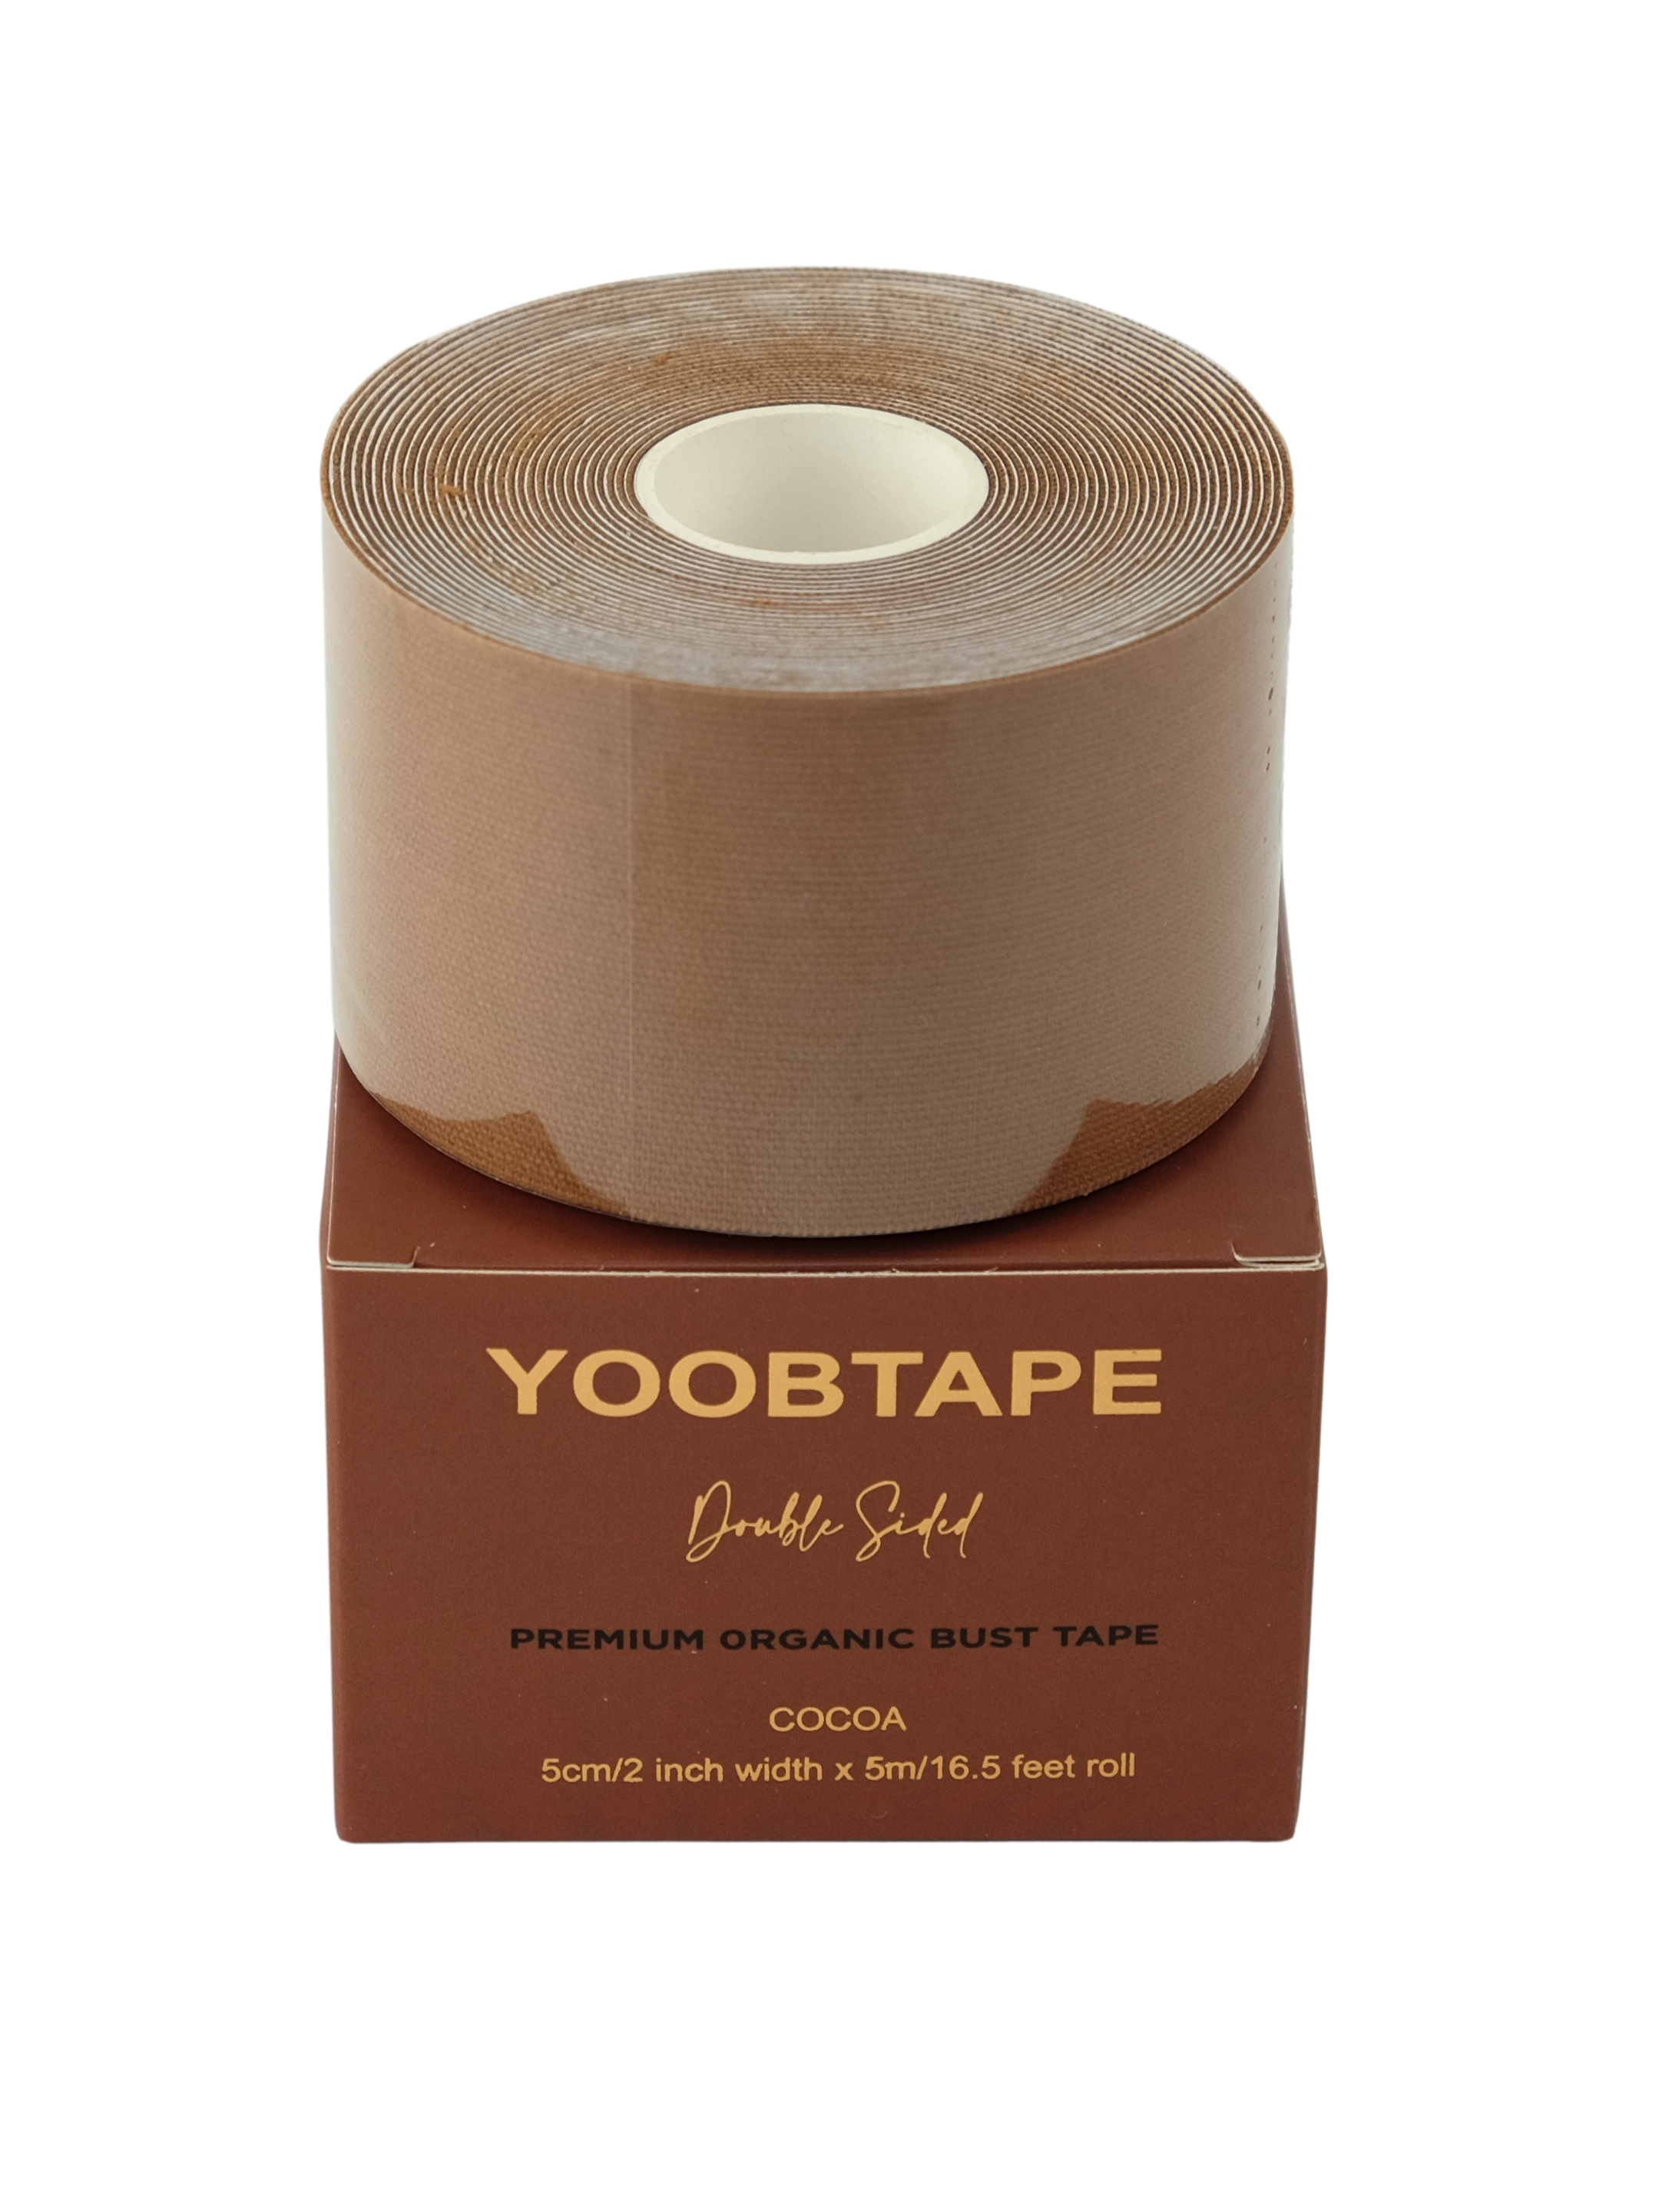 YOOBTAPE Premium Double Sided Bust Tape - Cocoa